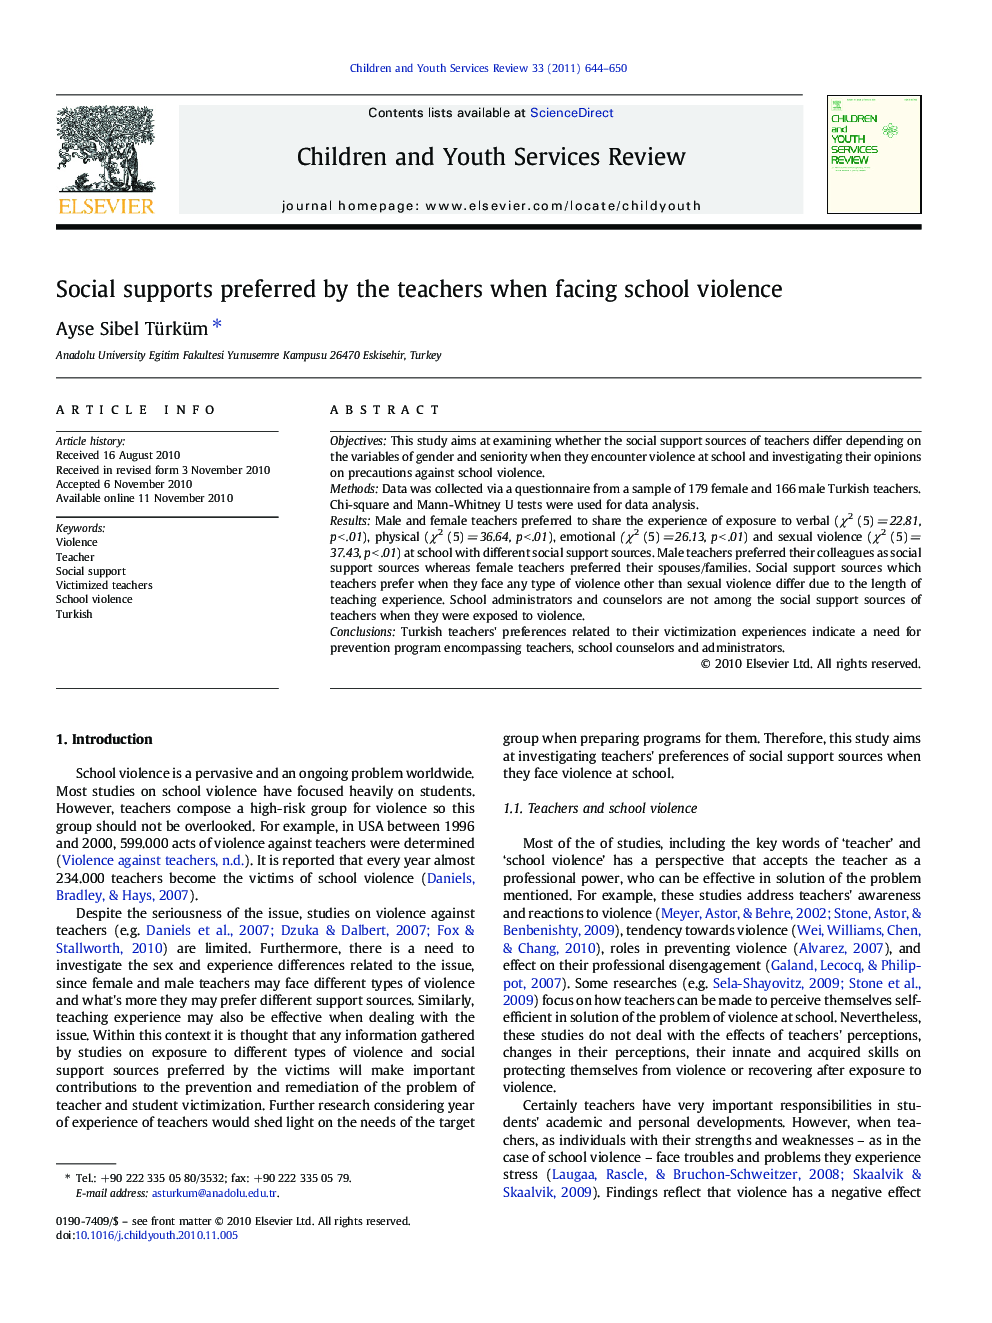 Social supports preferred by the teachers when facing school violence